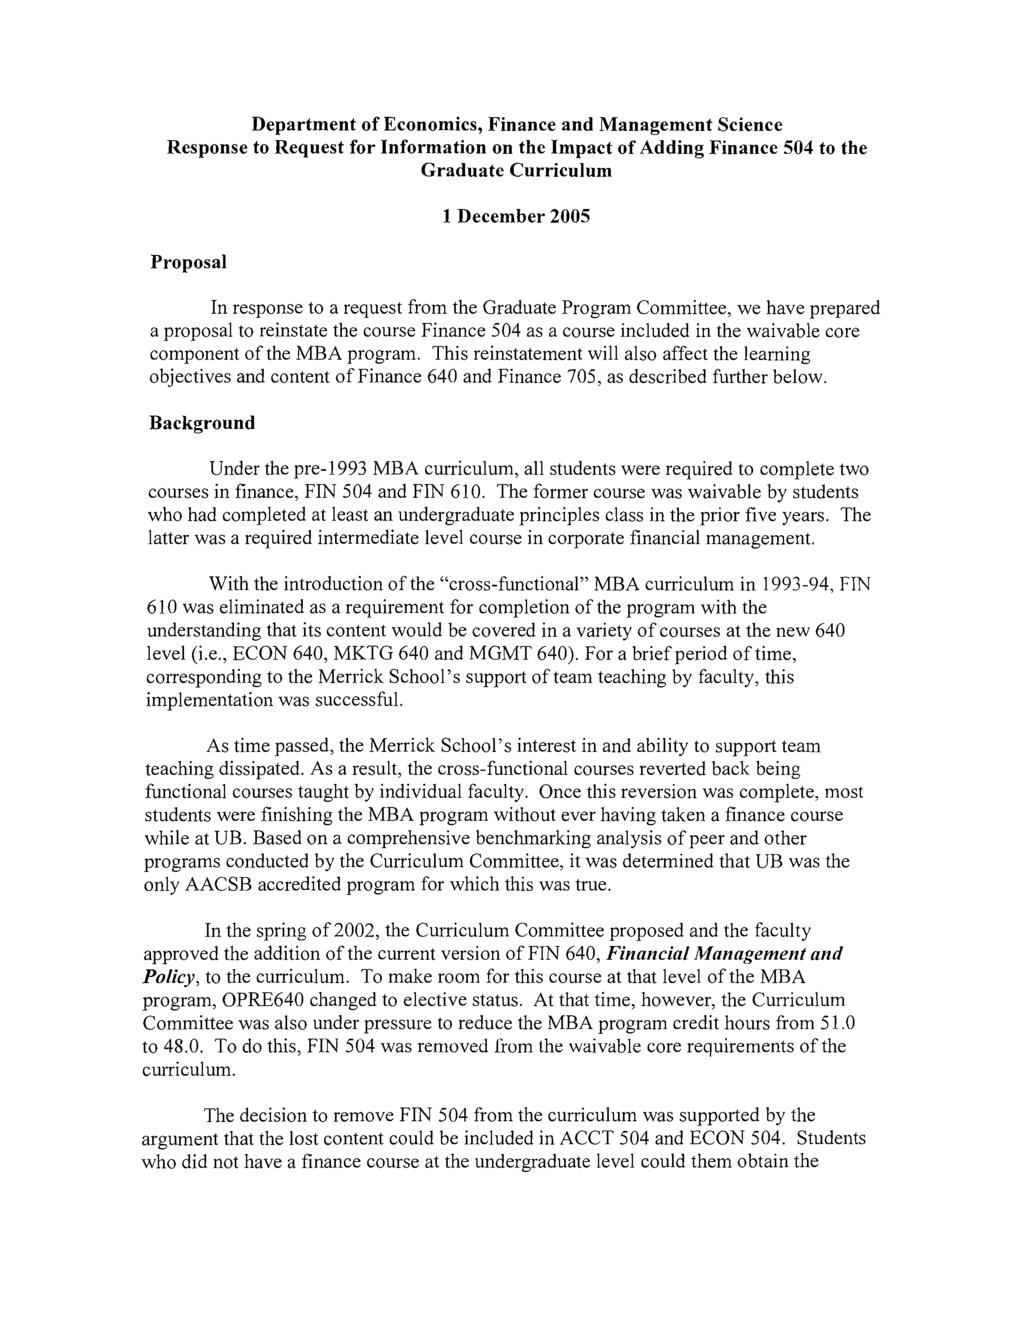 Department of Economics, Finance and Management Science Response to Request for nformation on the mpact of Adding Finance 504 to the Graduate Curriculum Proposal 1 December 2005 n response to a